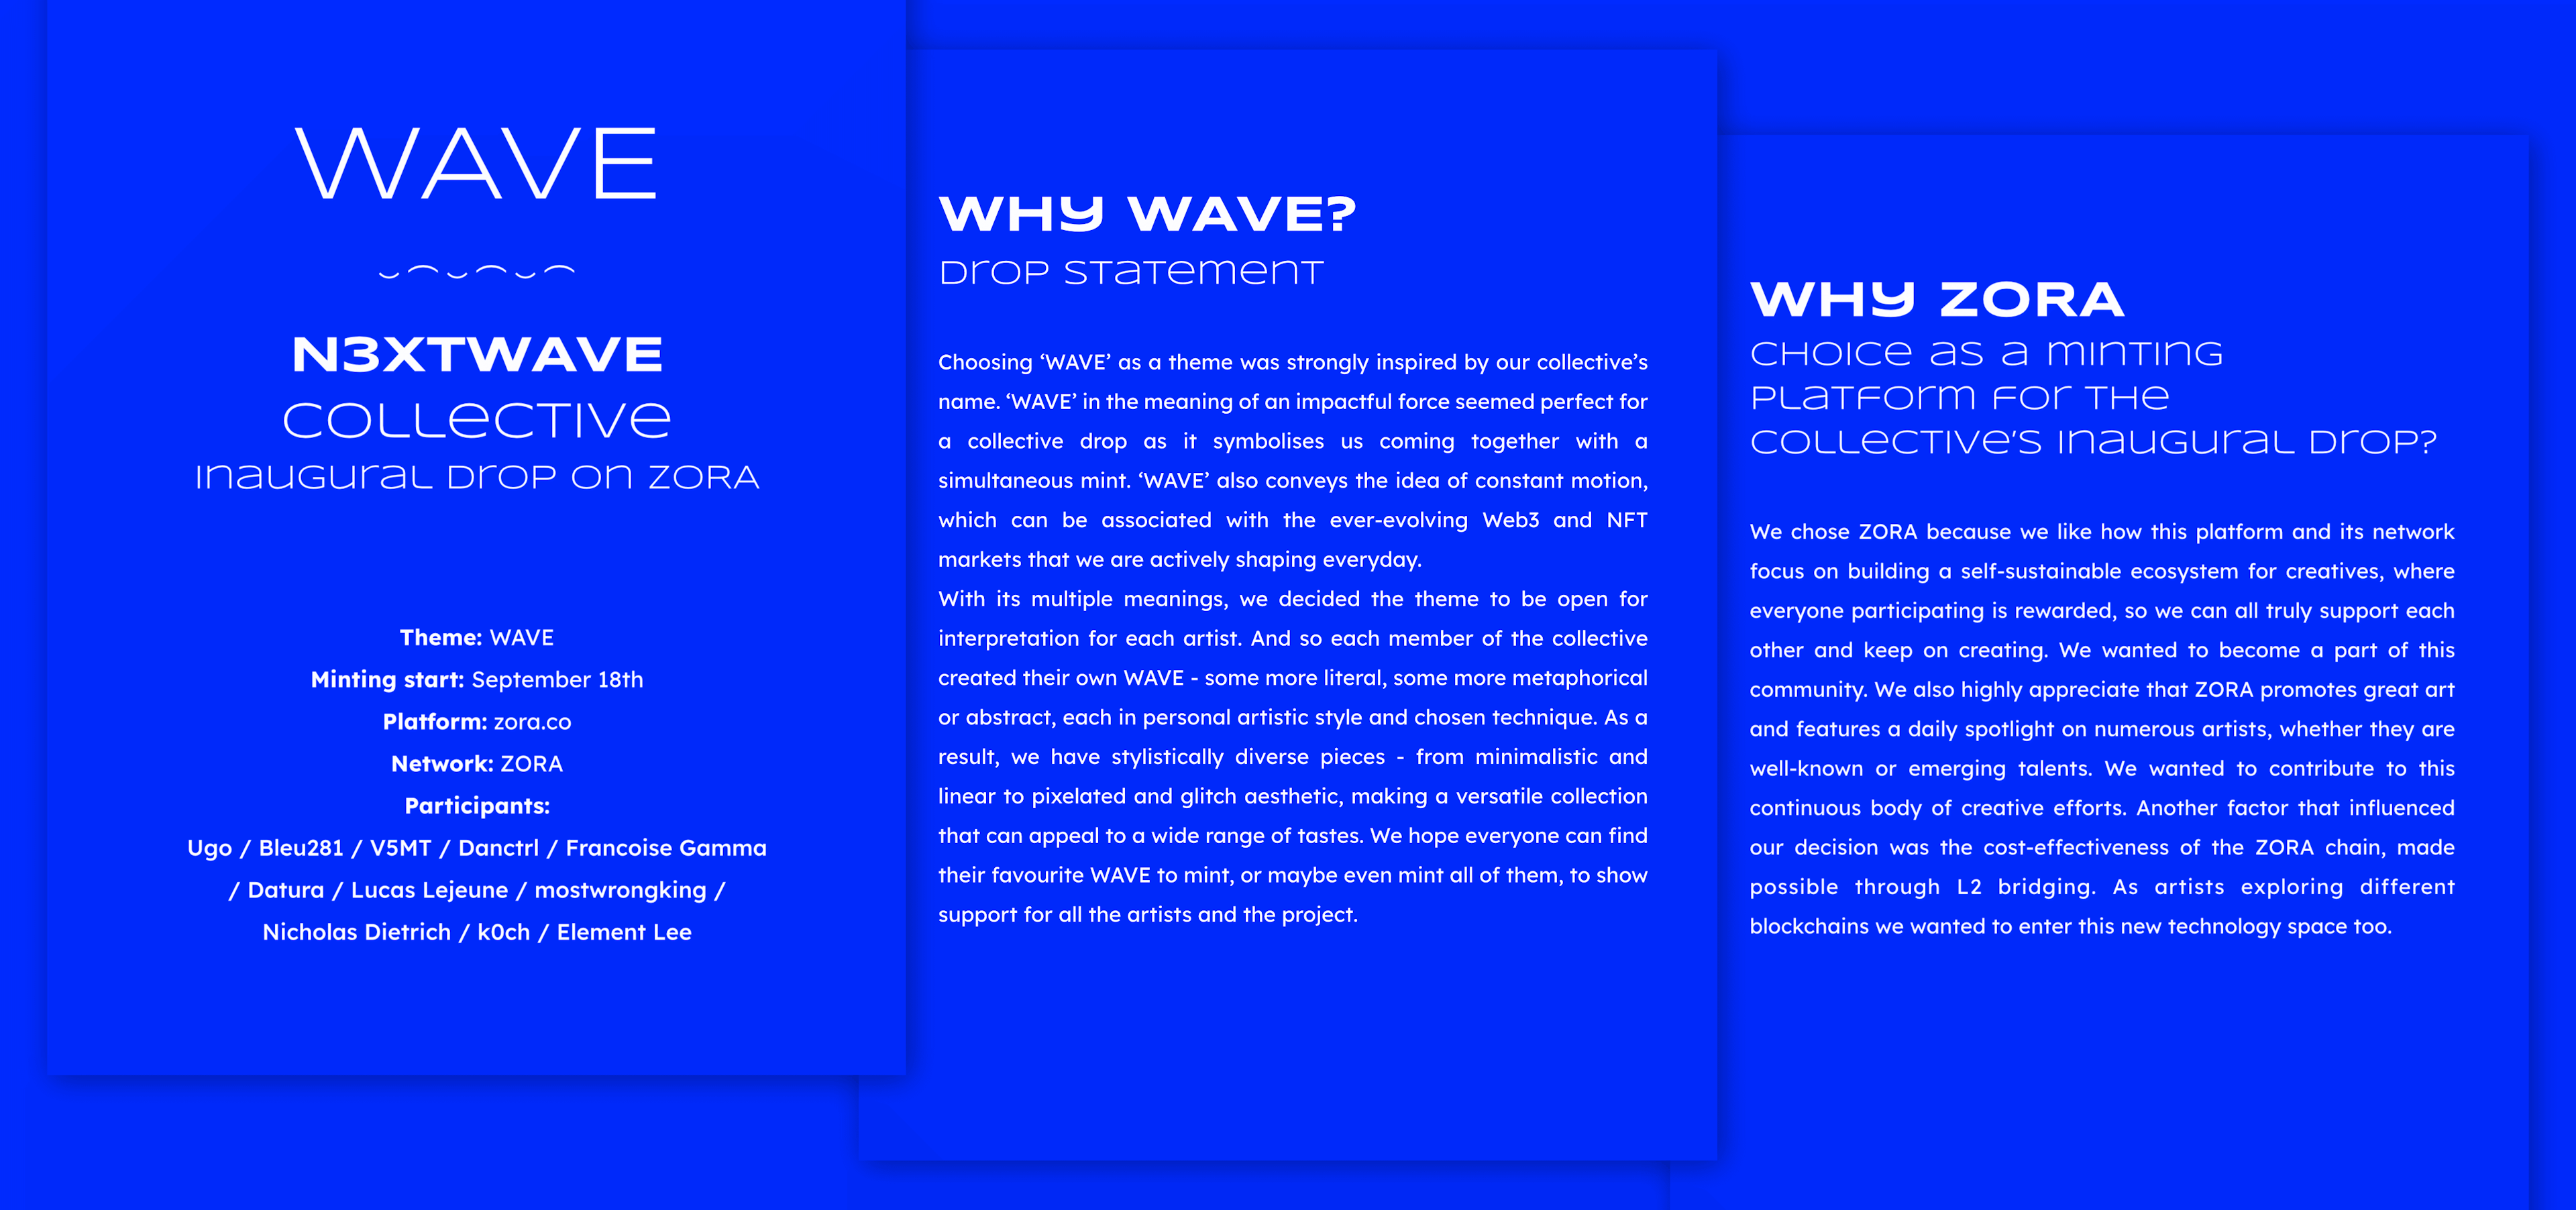 Pages from WAVE_ZORA_Drop_by_N3XTWAVE_Collective_Info.pdf I wrote and designed.